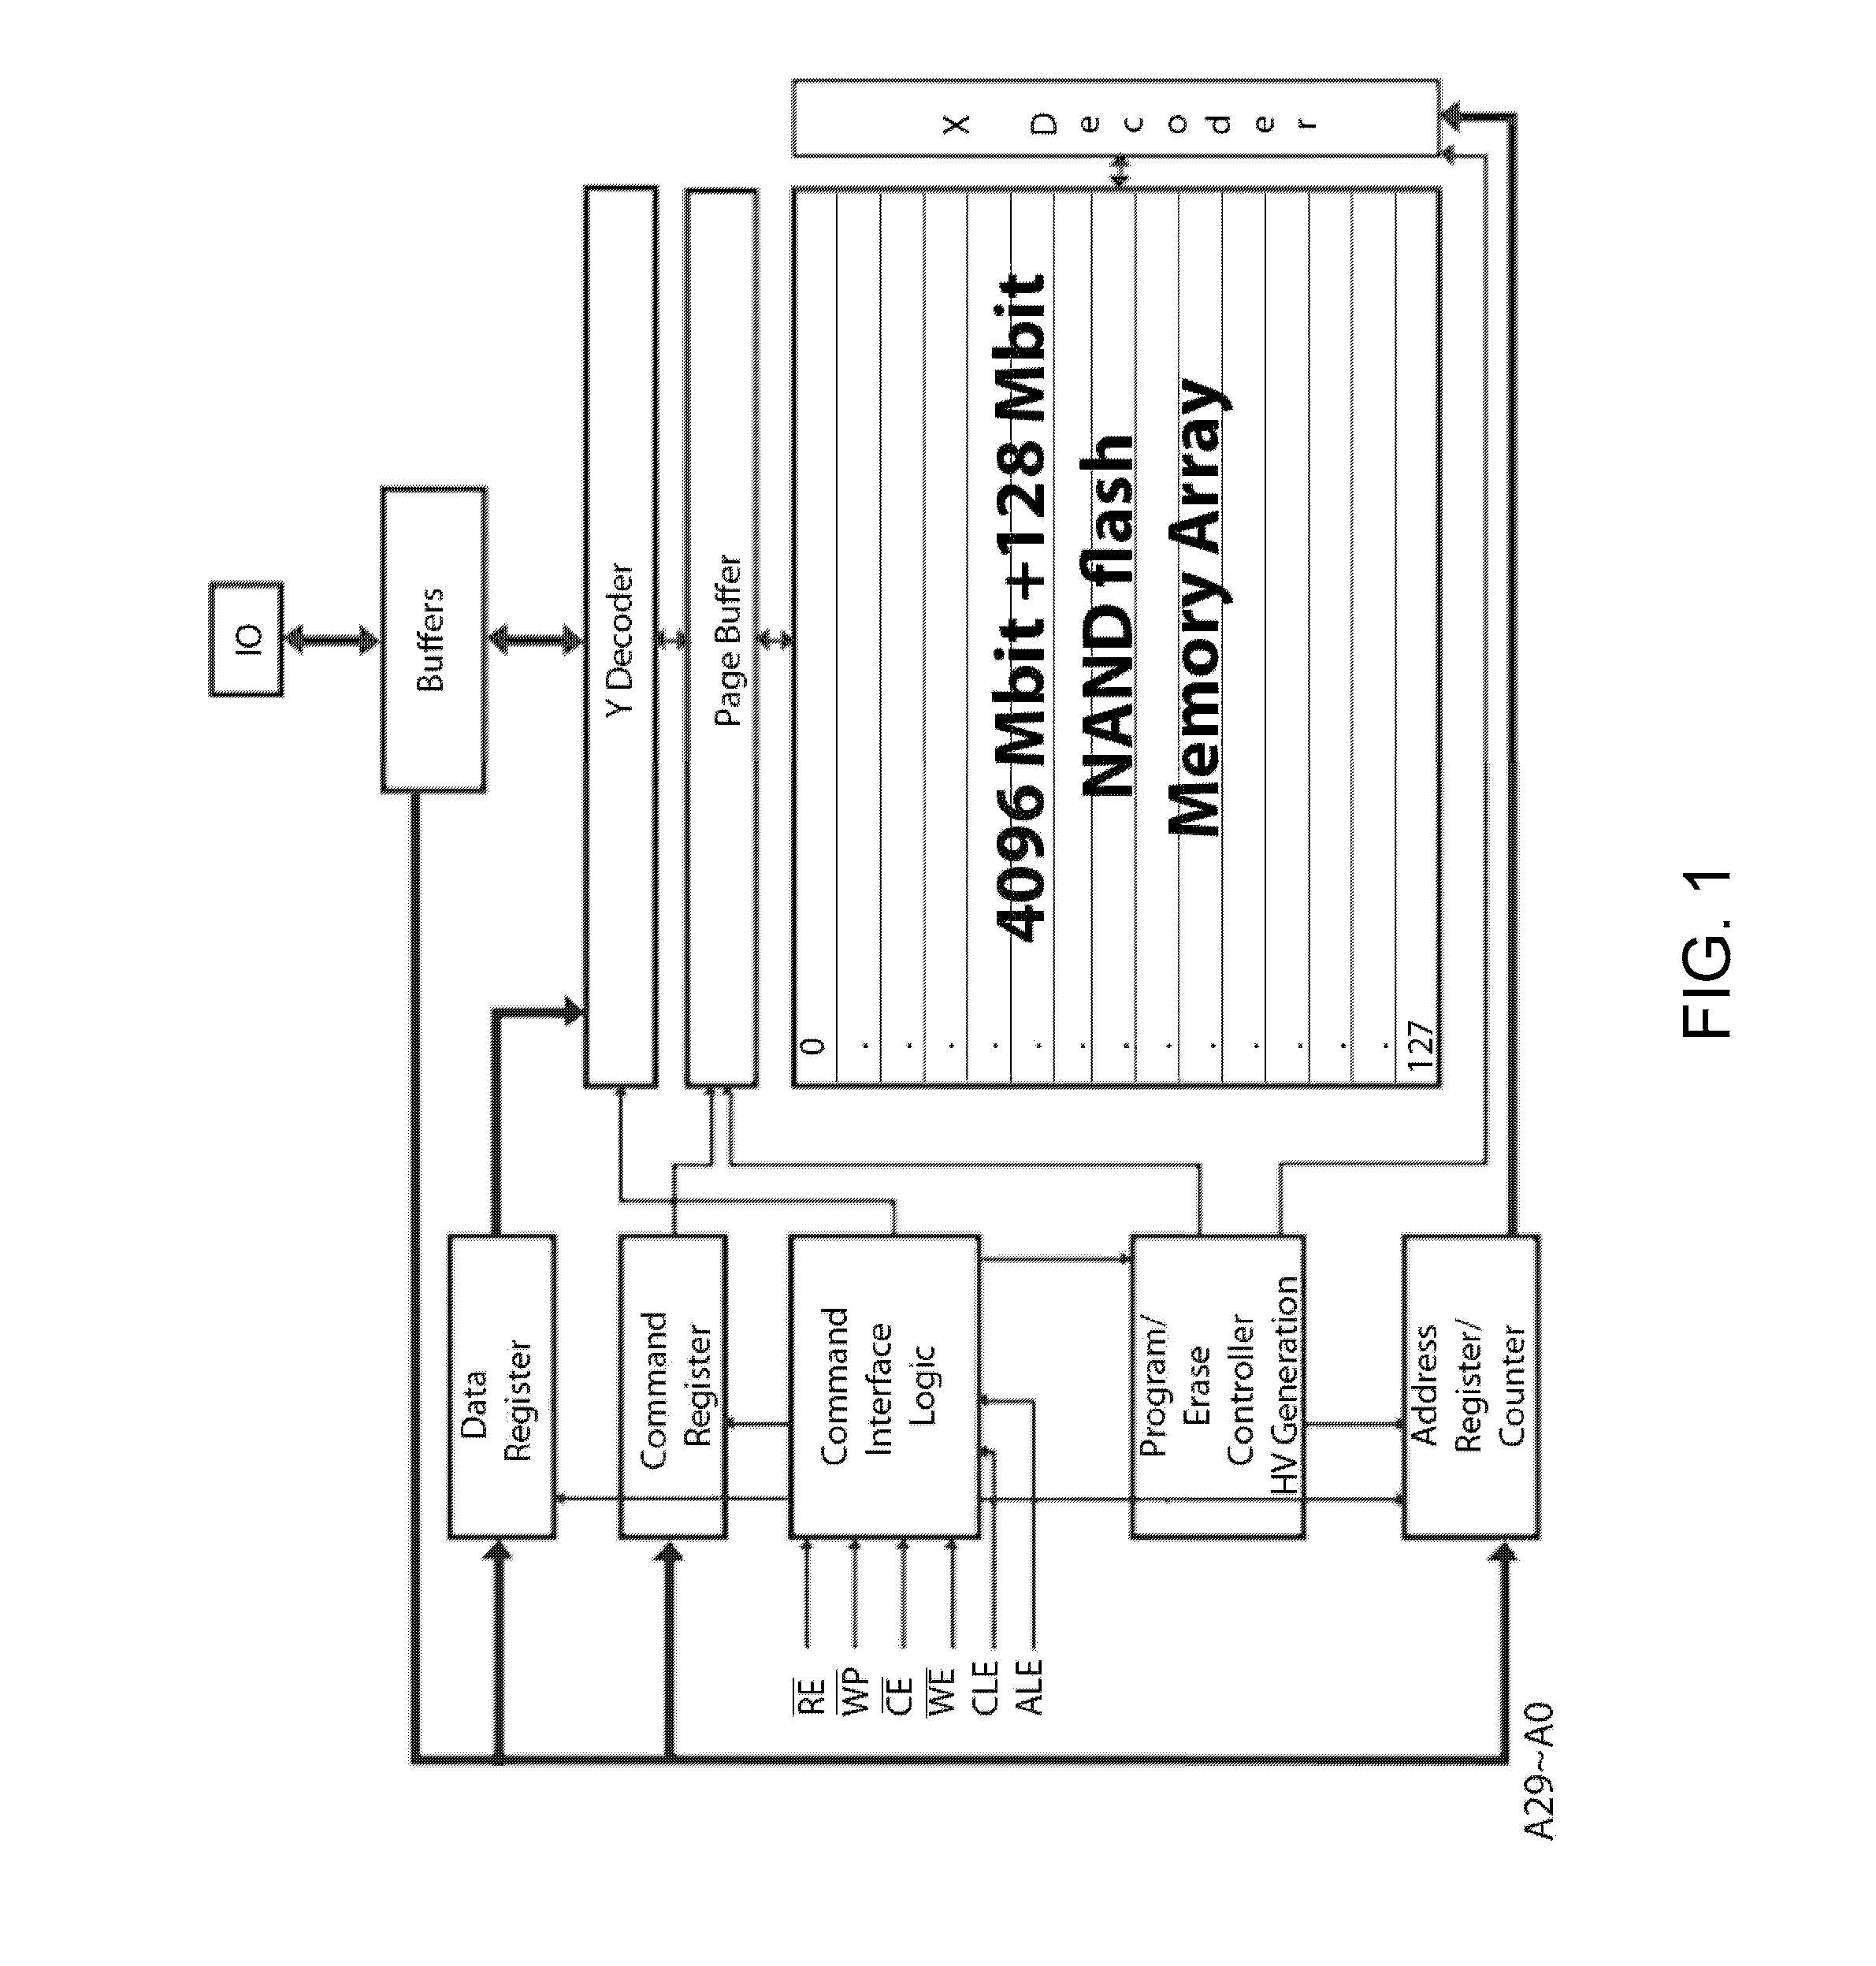 Page-buffer management of non-volatile memory-based mass storage devices